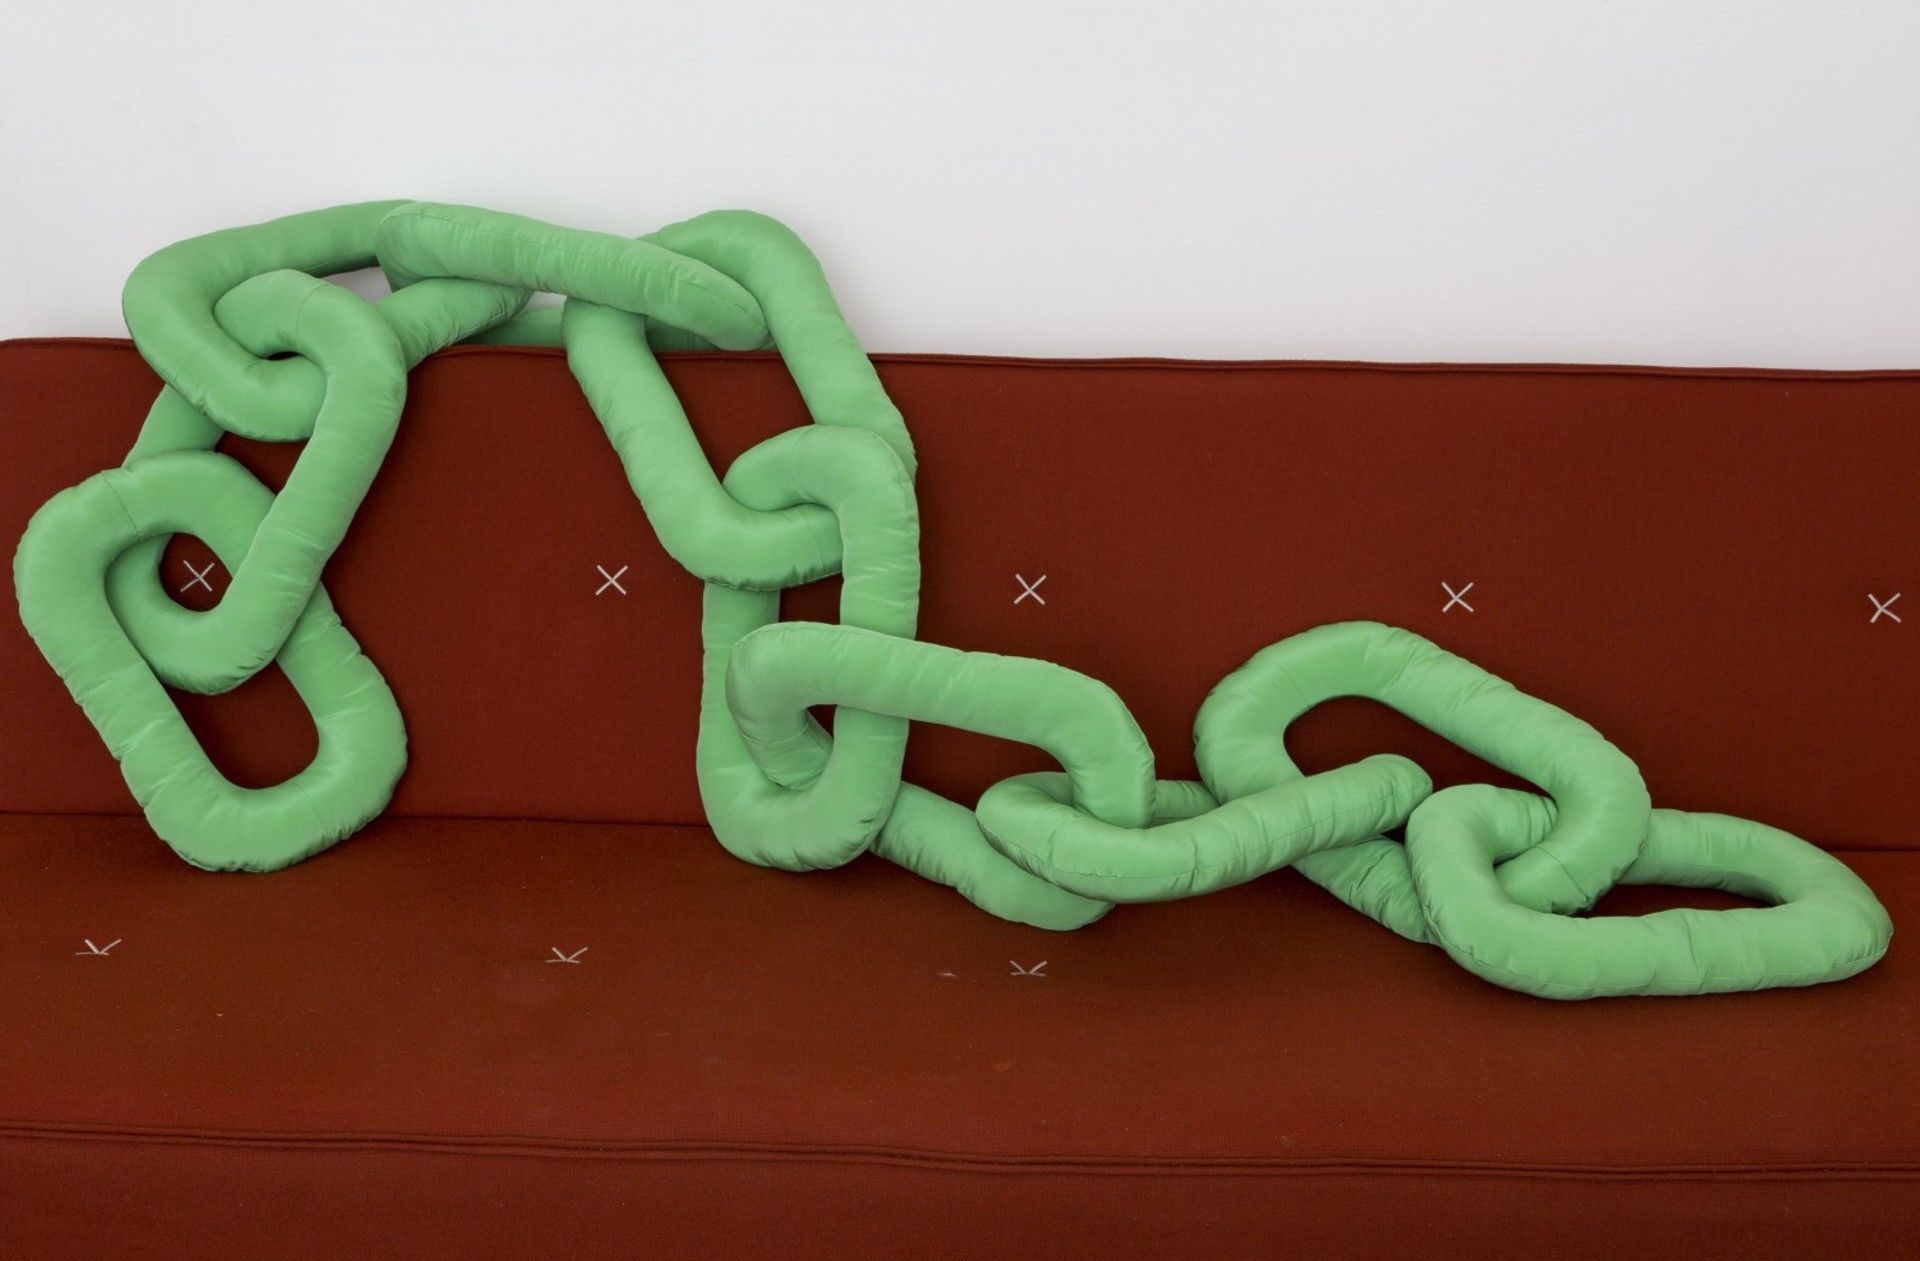 Chain Pillow by Katie Stout for exhibition Docile/Domicile/Dandy at Gallery Diet, Miami 2015